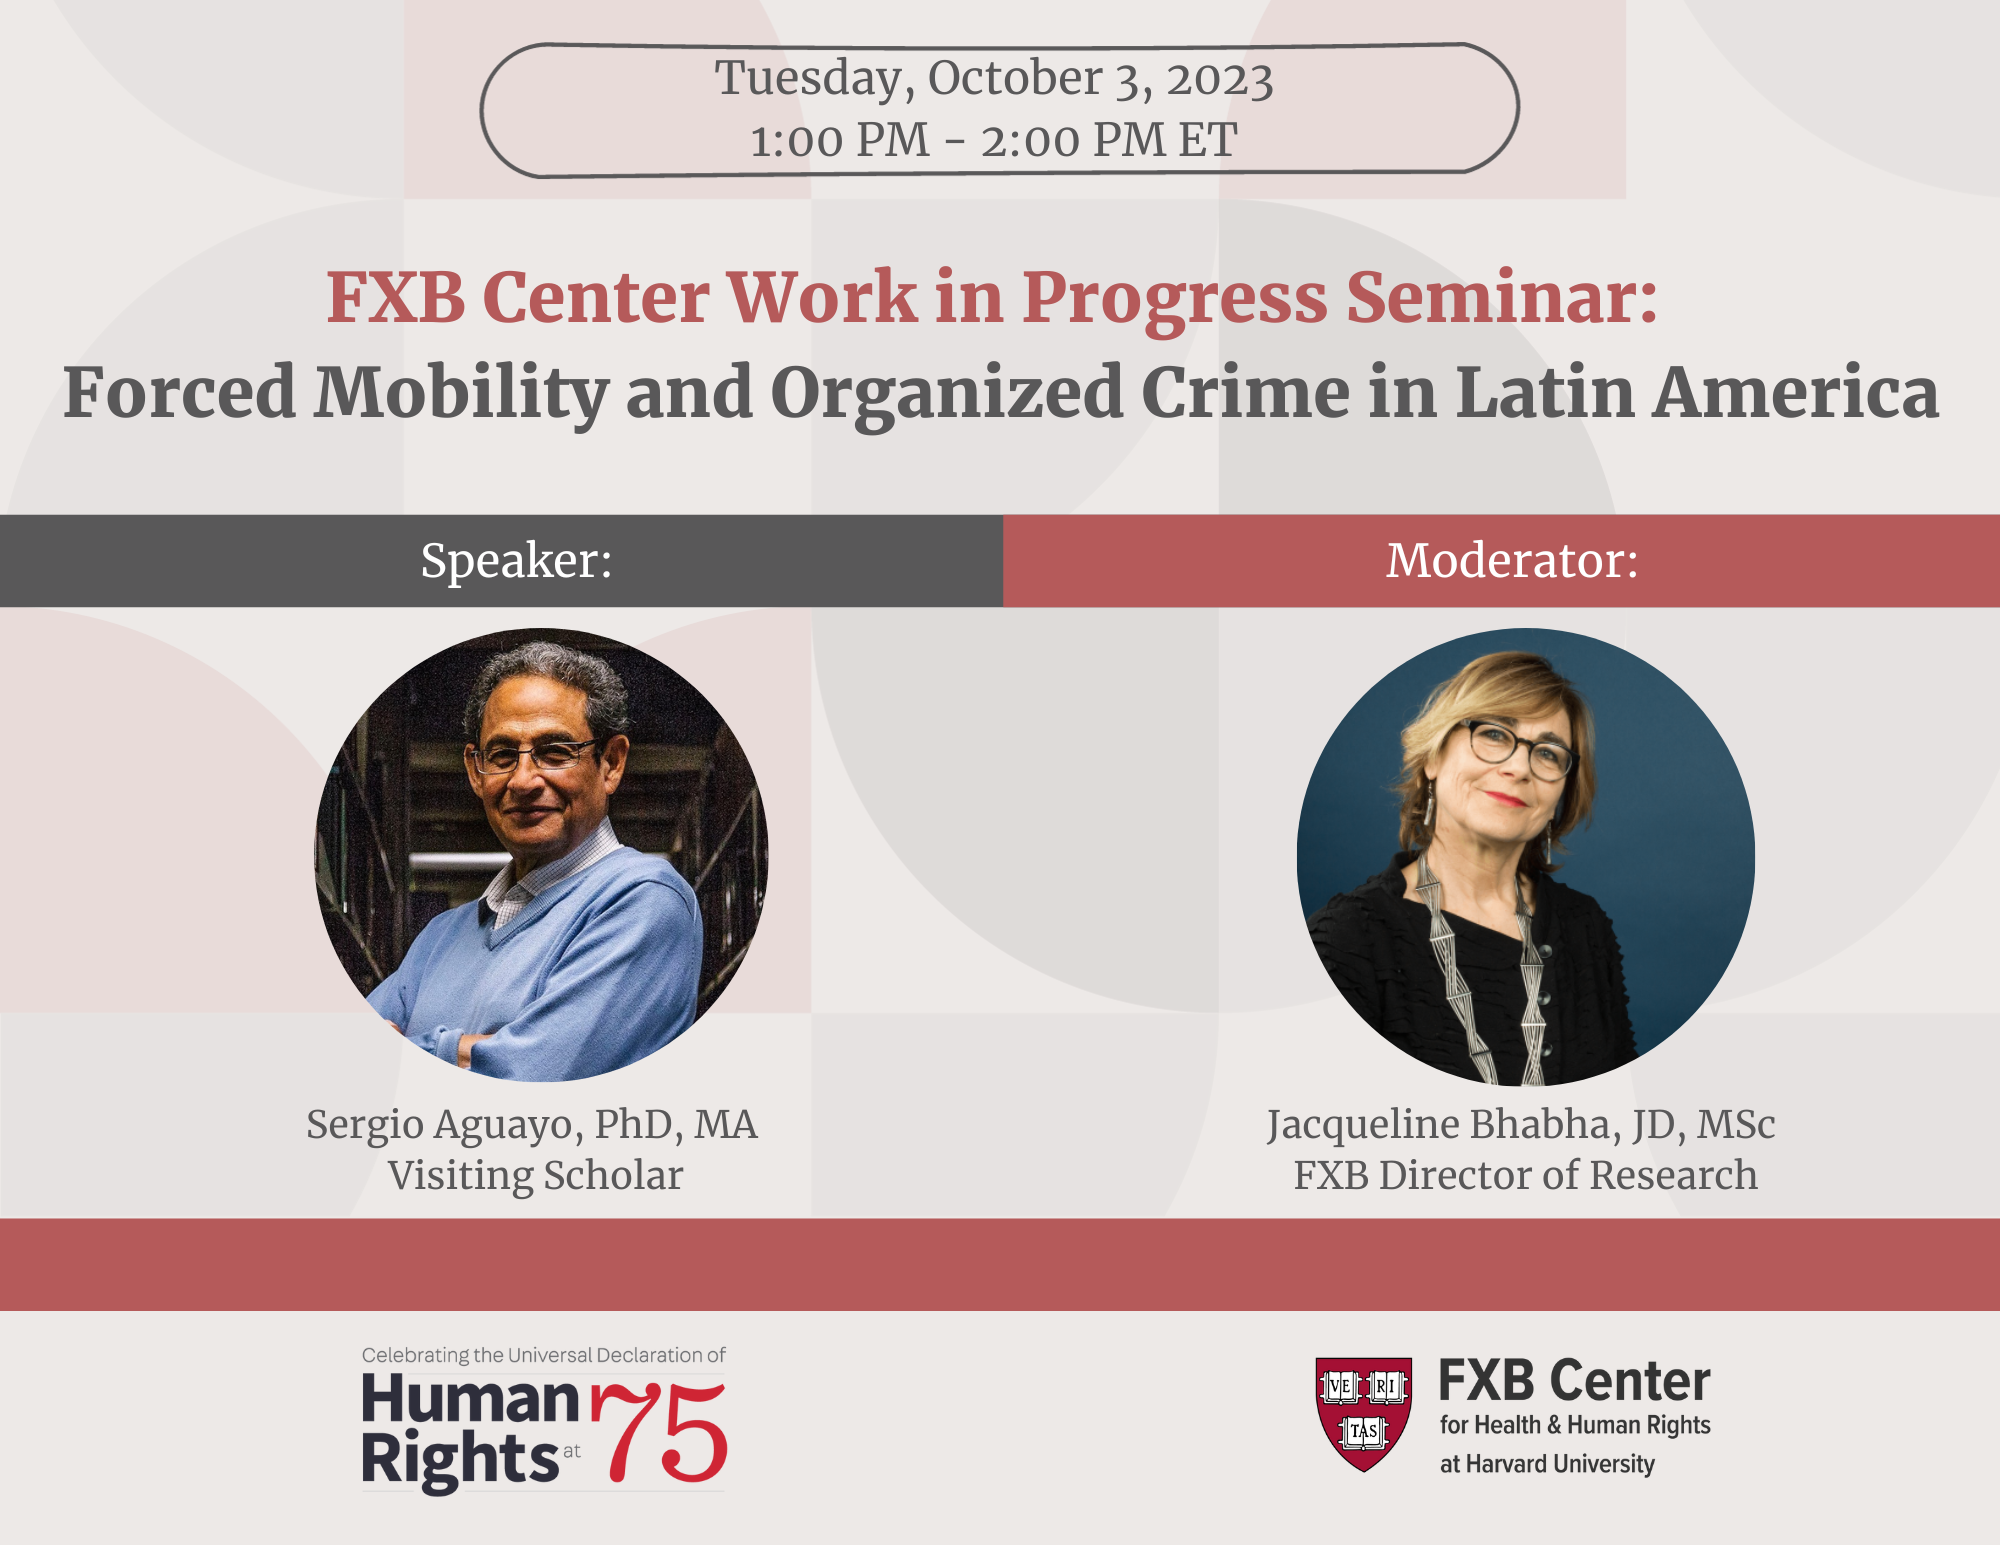 FXB Center Work in Progress Seminar: Forced Mobility and Organized Crime in Latin America